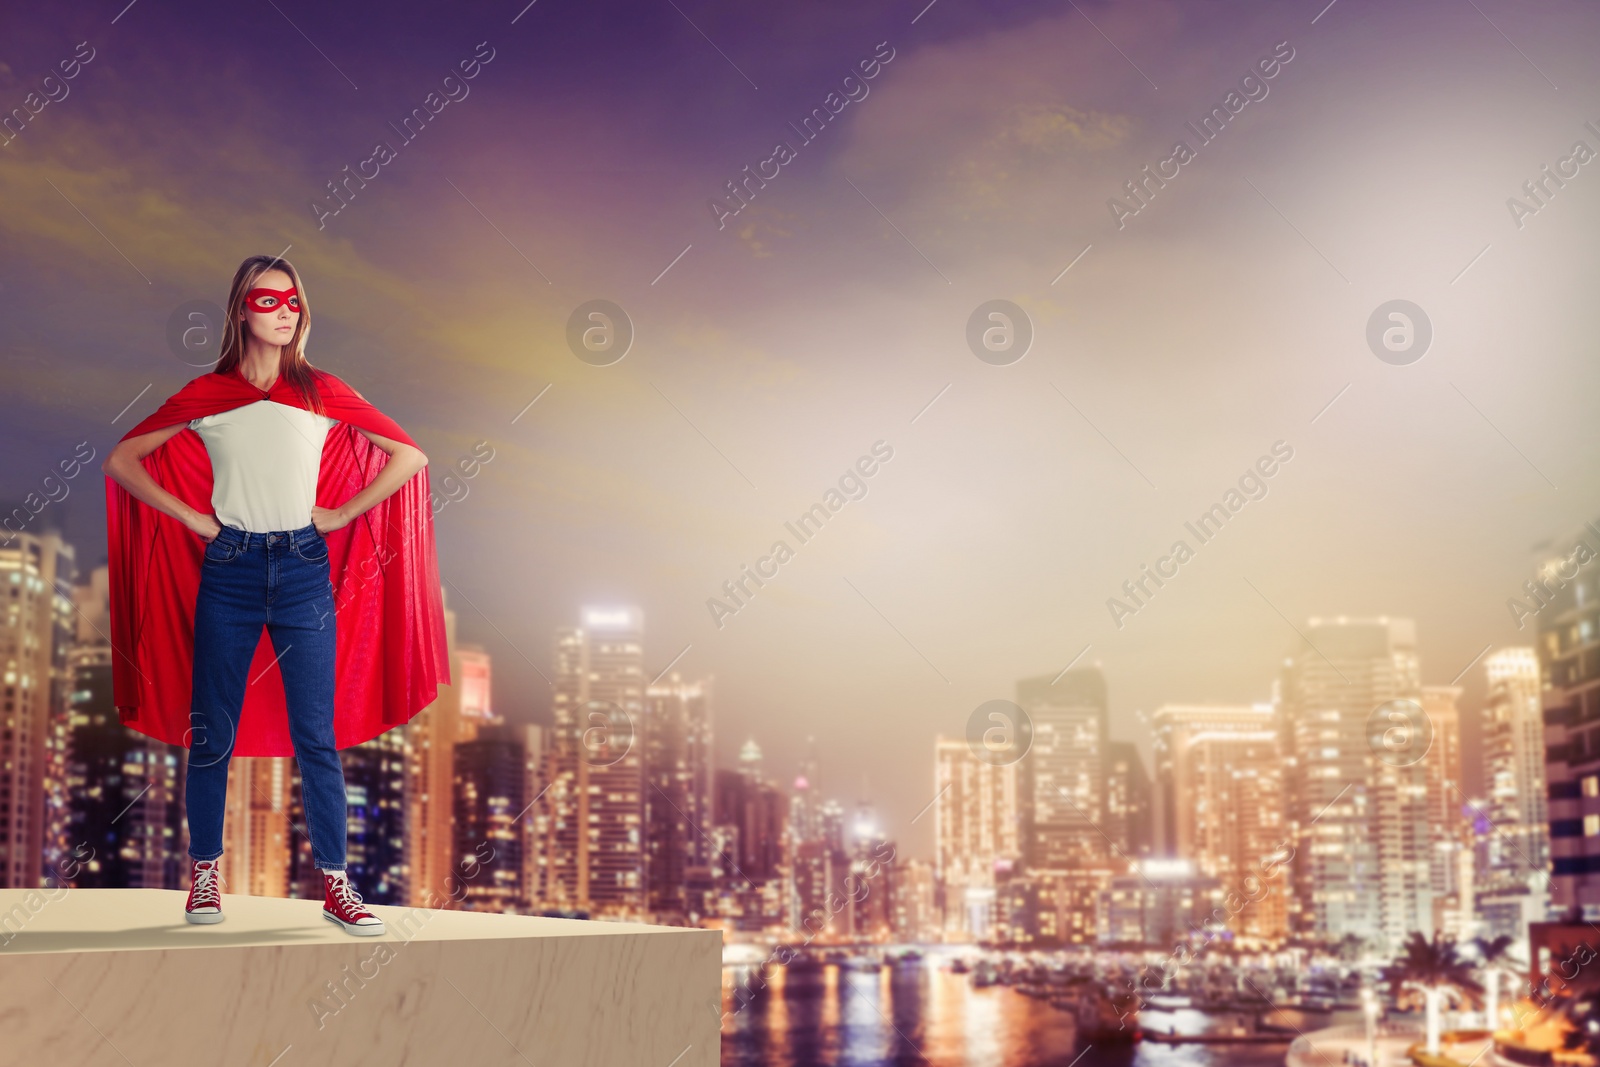 Image of Superhero, motivation and power. Woman in cape and mask on high building in city